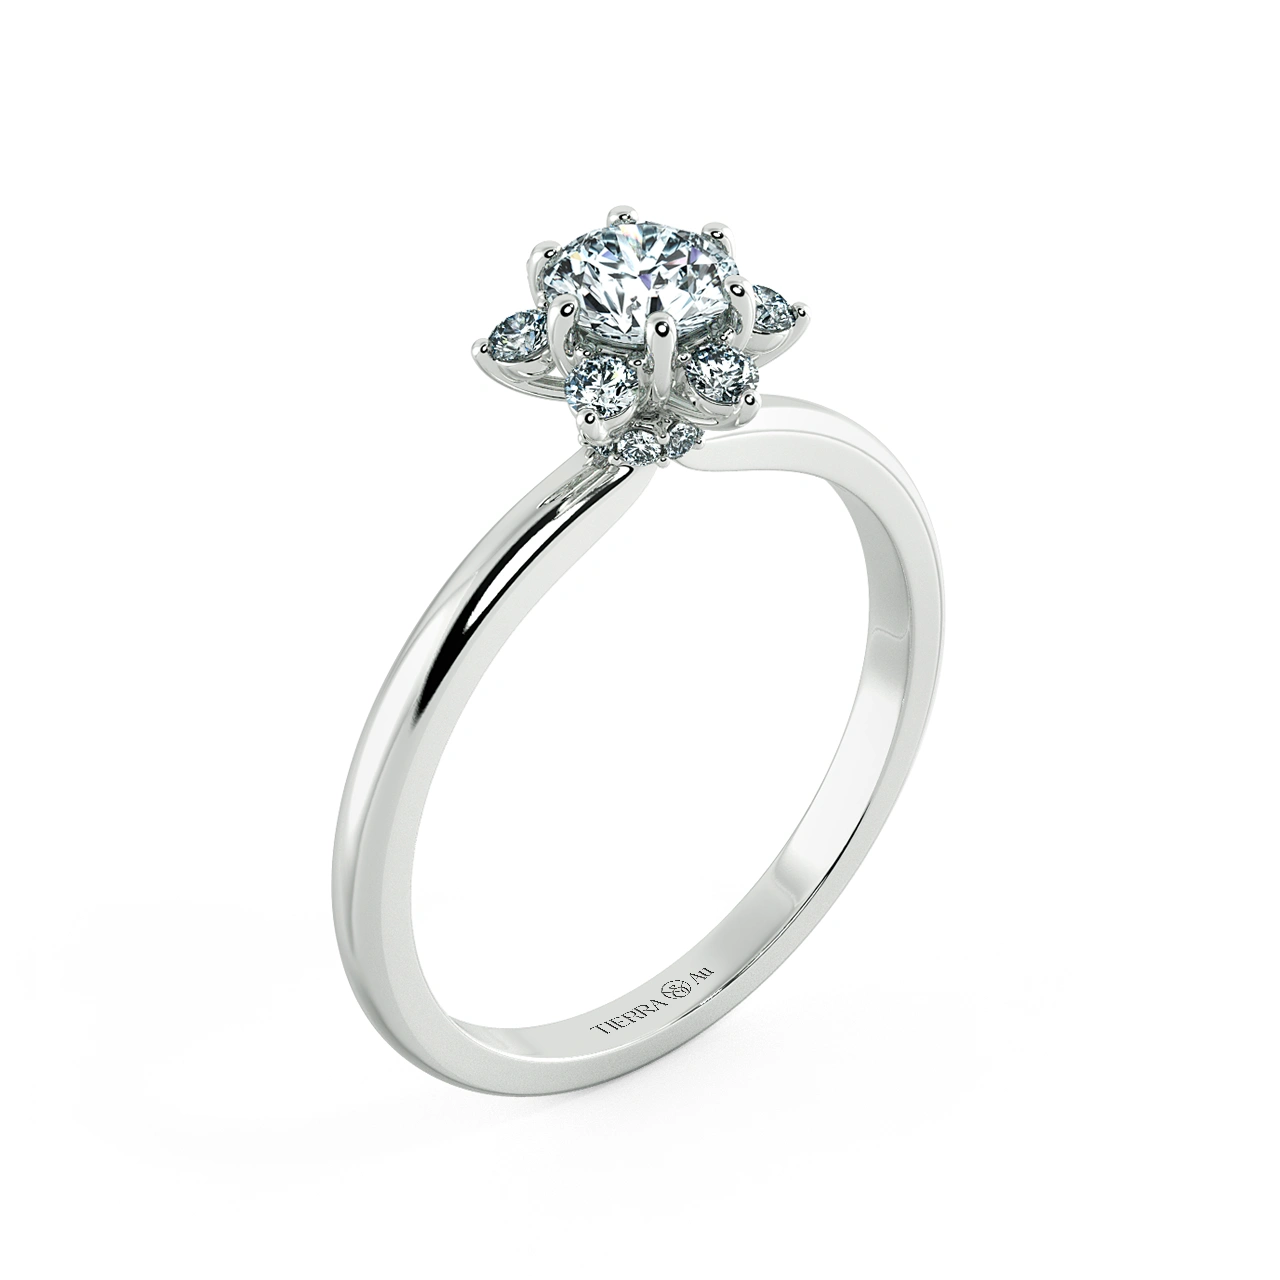 Small Halo Snowflake Engagement Ring, Shiny Band with Bezel Setting NCH2003 4